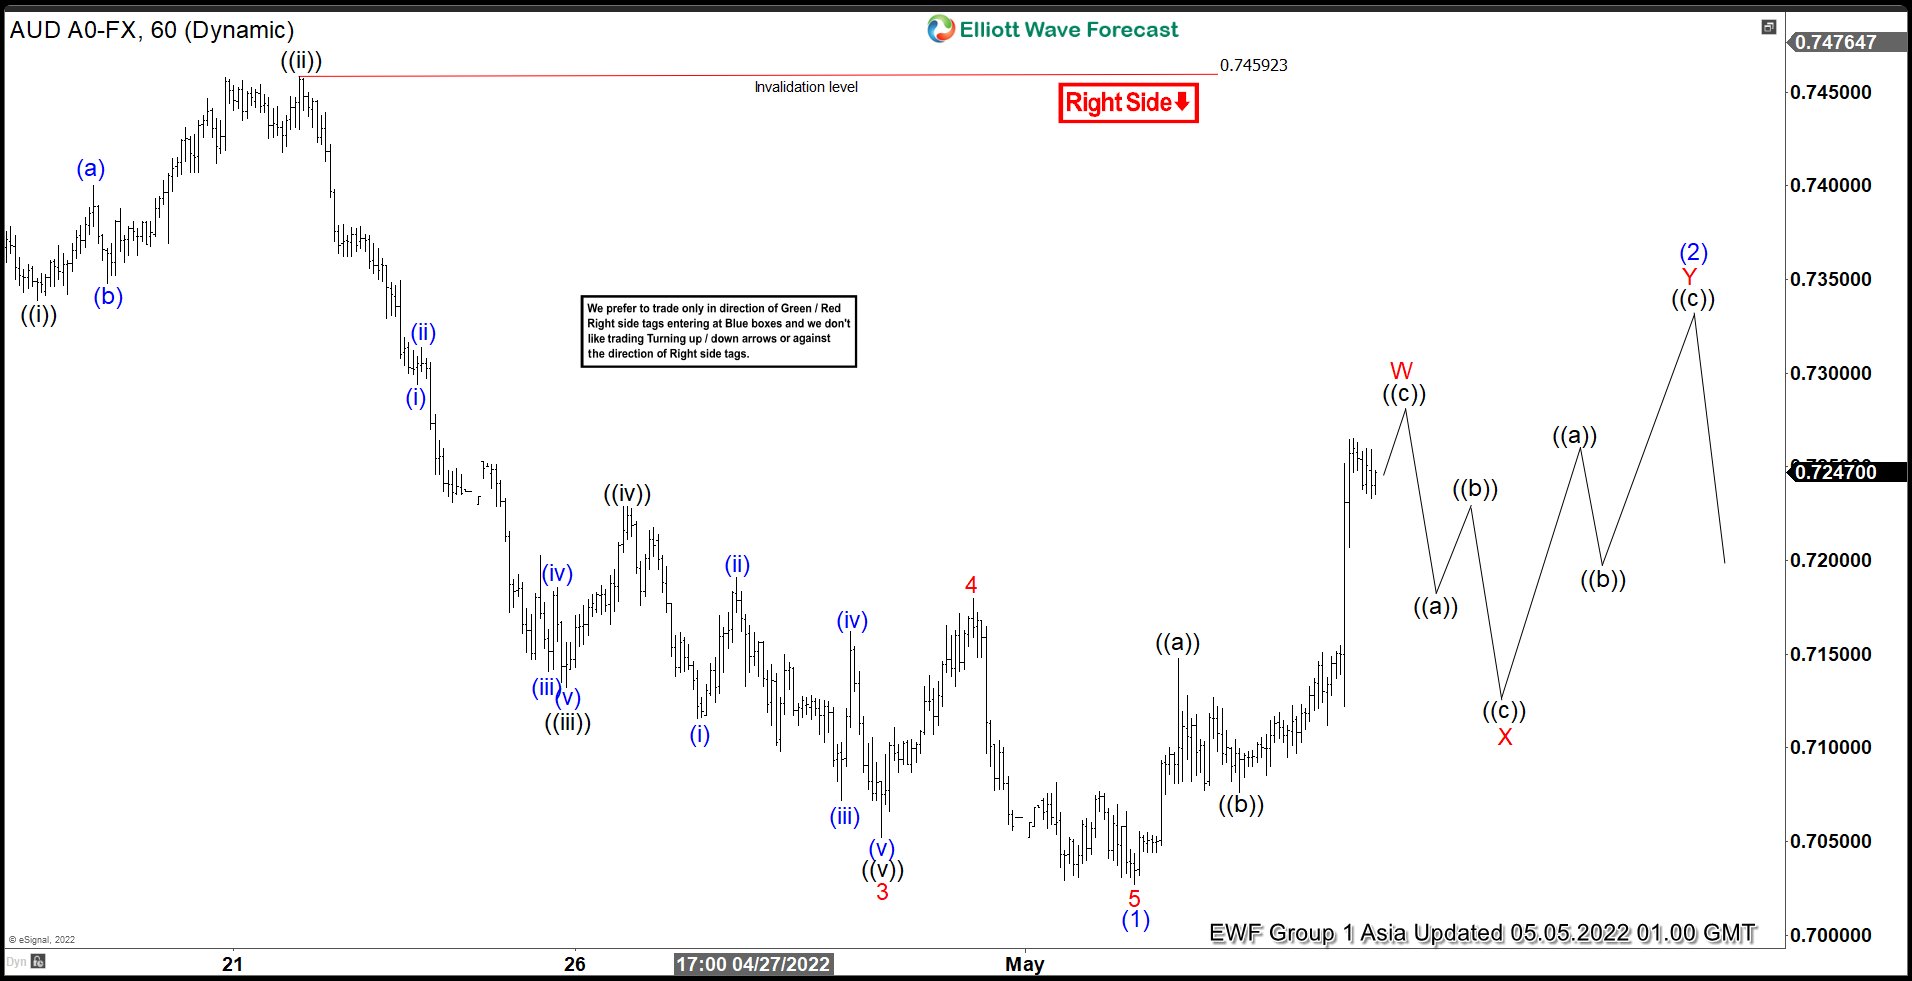 Elliott Wave View: AUDUSD Rally is Likely Just a Counter Trend